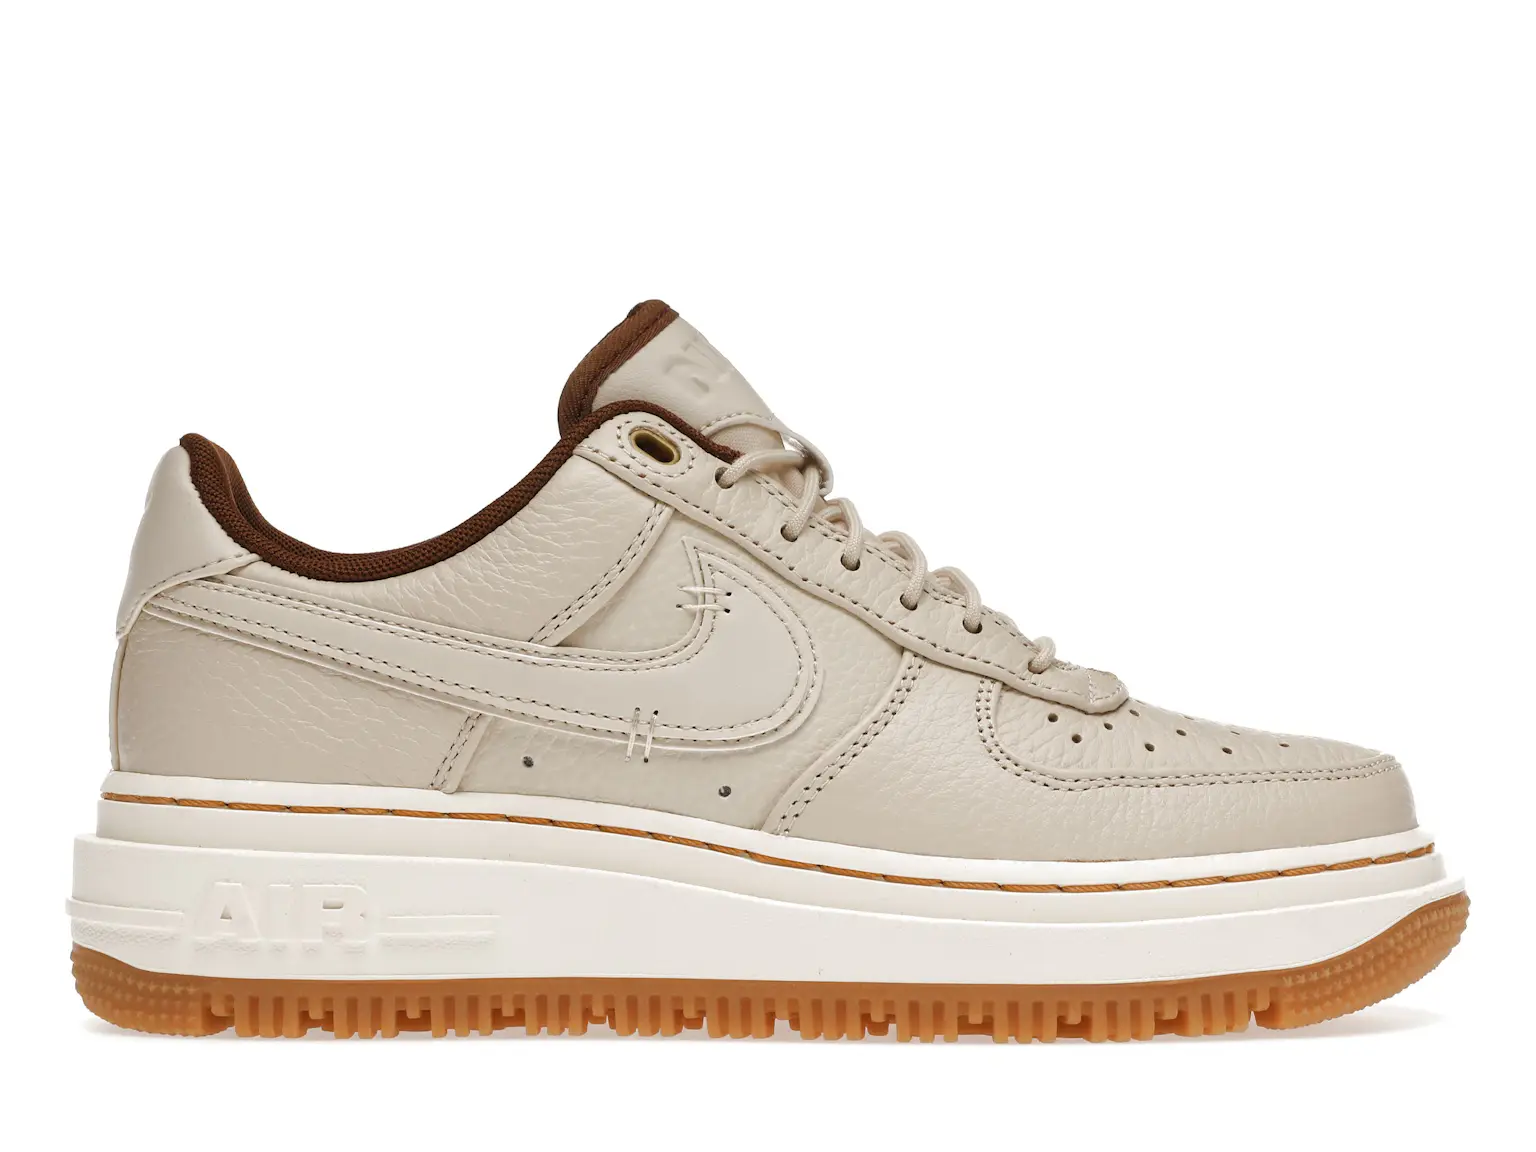 Nike Air Force 1 Low Luxe Pearl White Uomo - DB4109-200 - IT